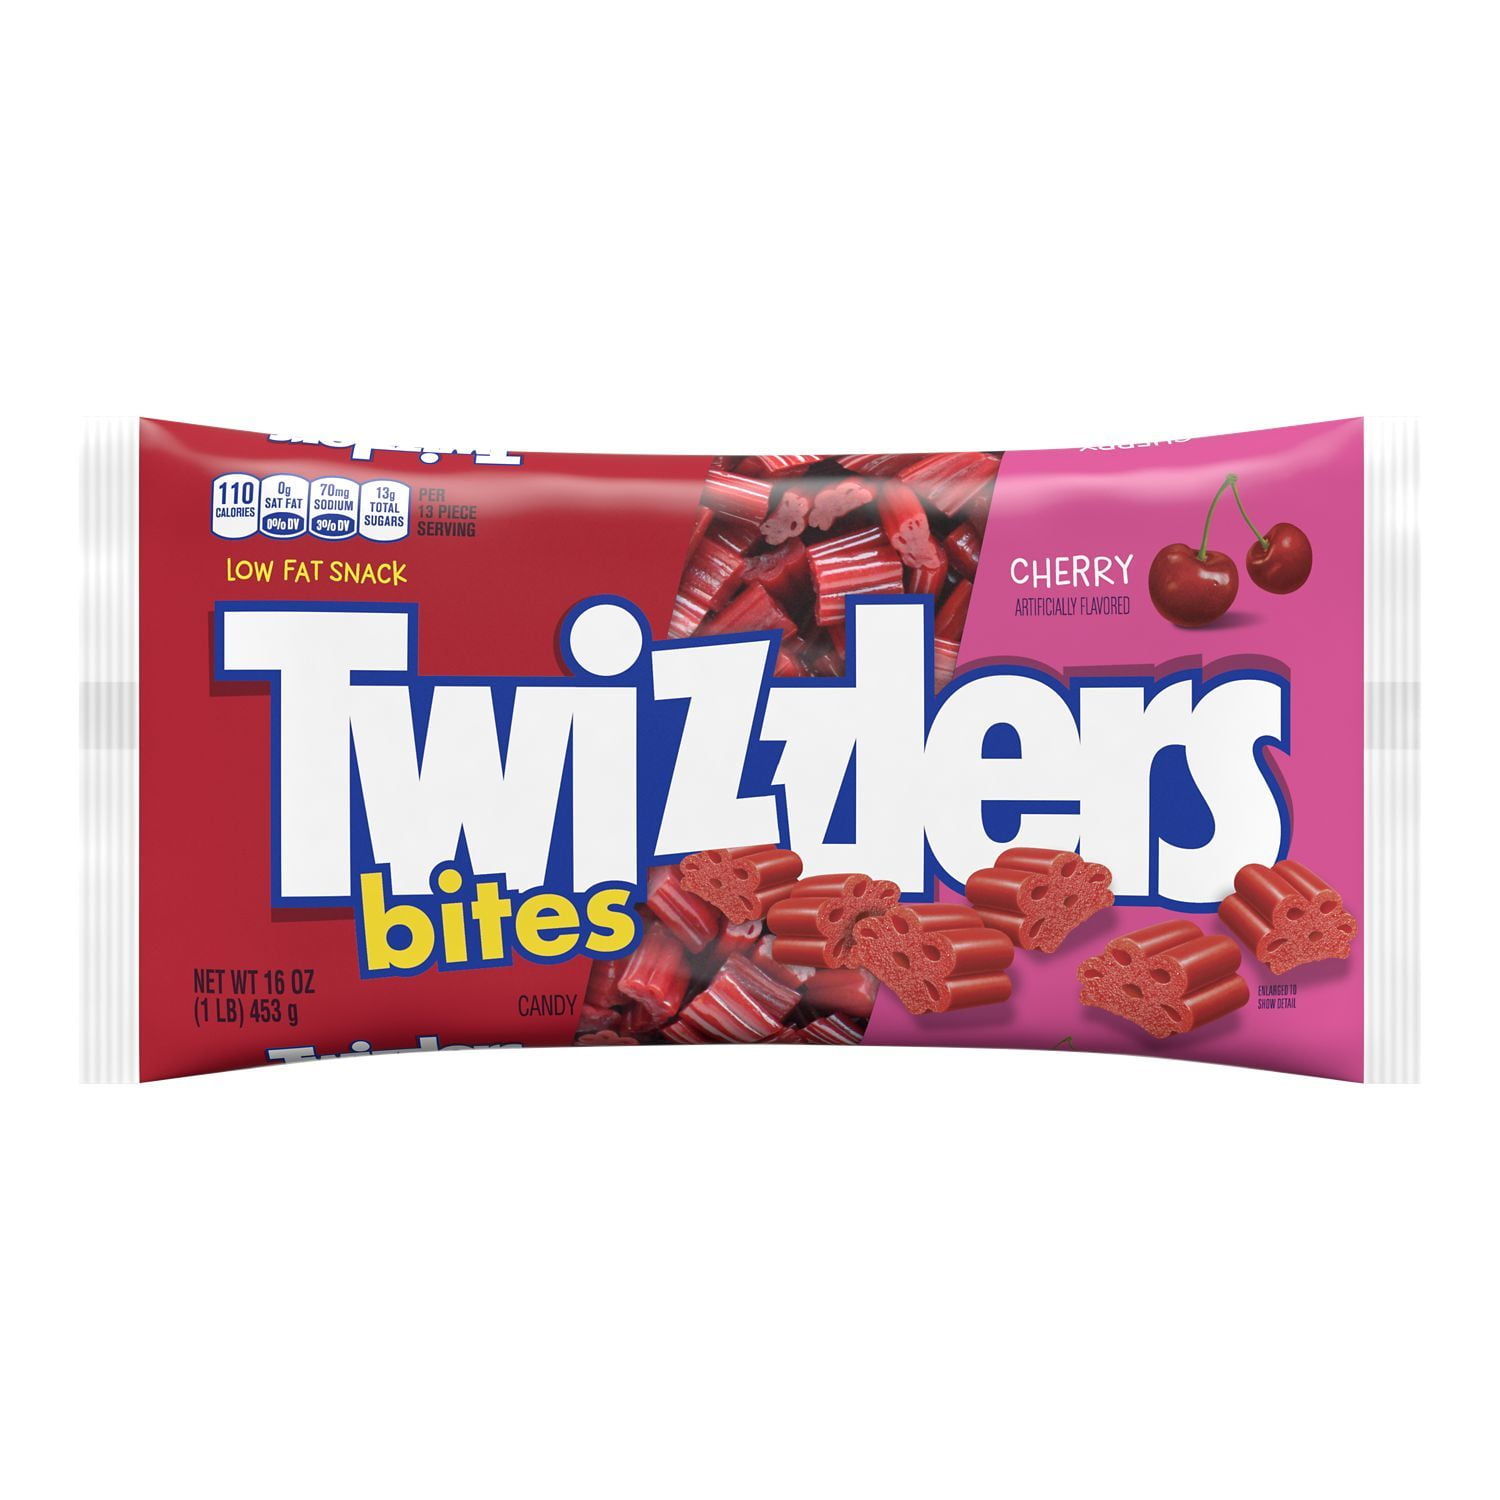 TWIZZLERS, Bites Cherry Flavored Chewy Candy, Low Fat, 16 oz, Bag